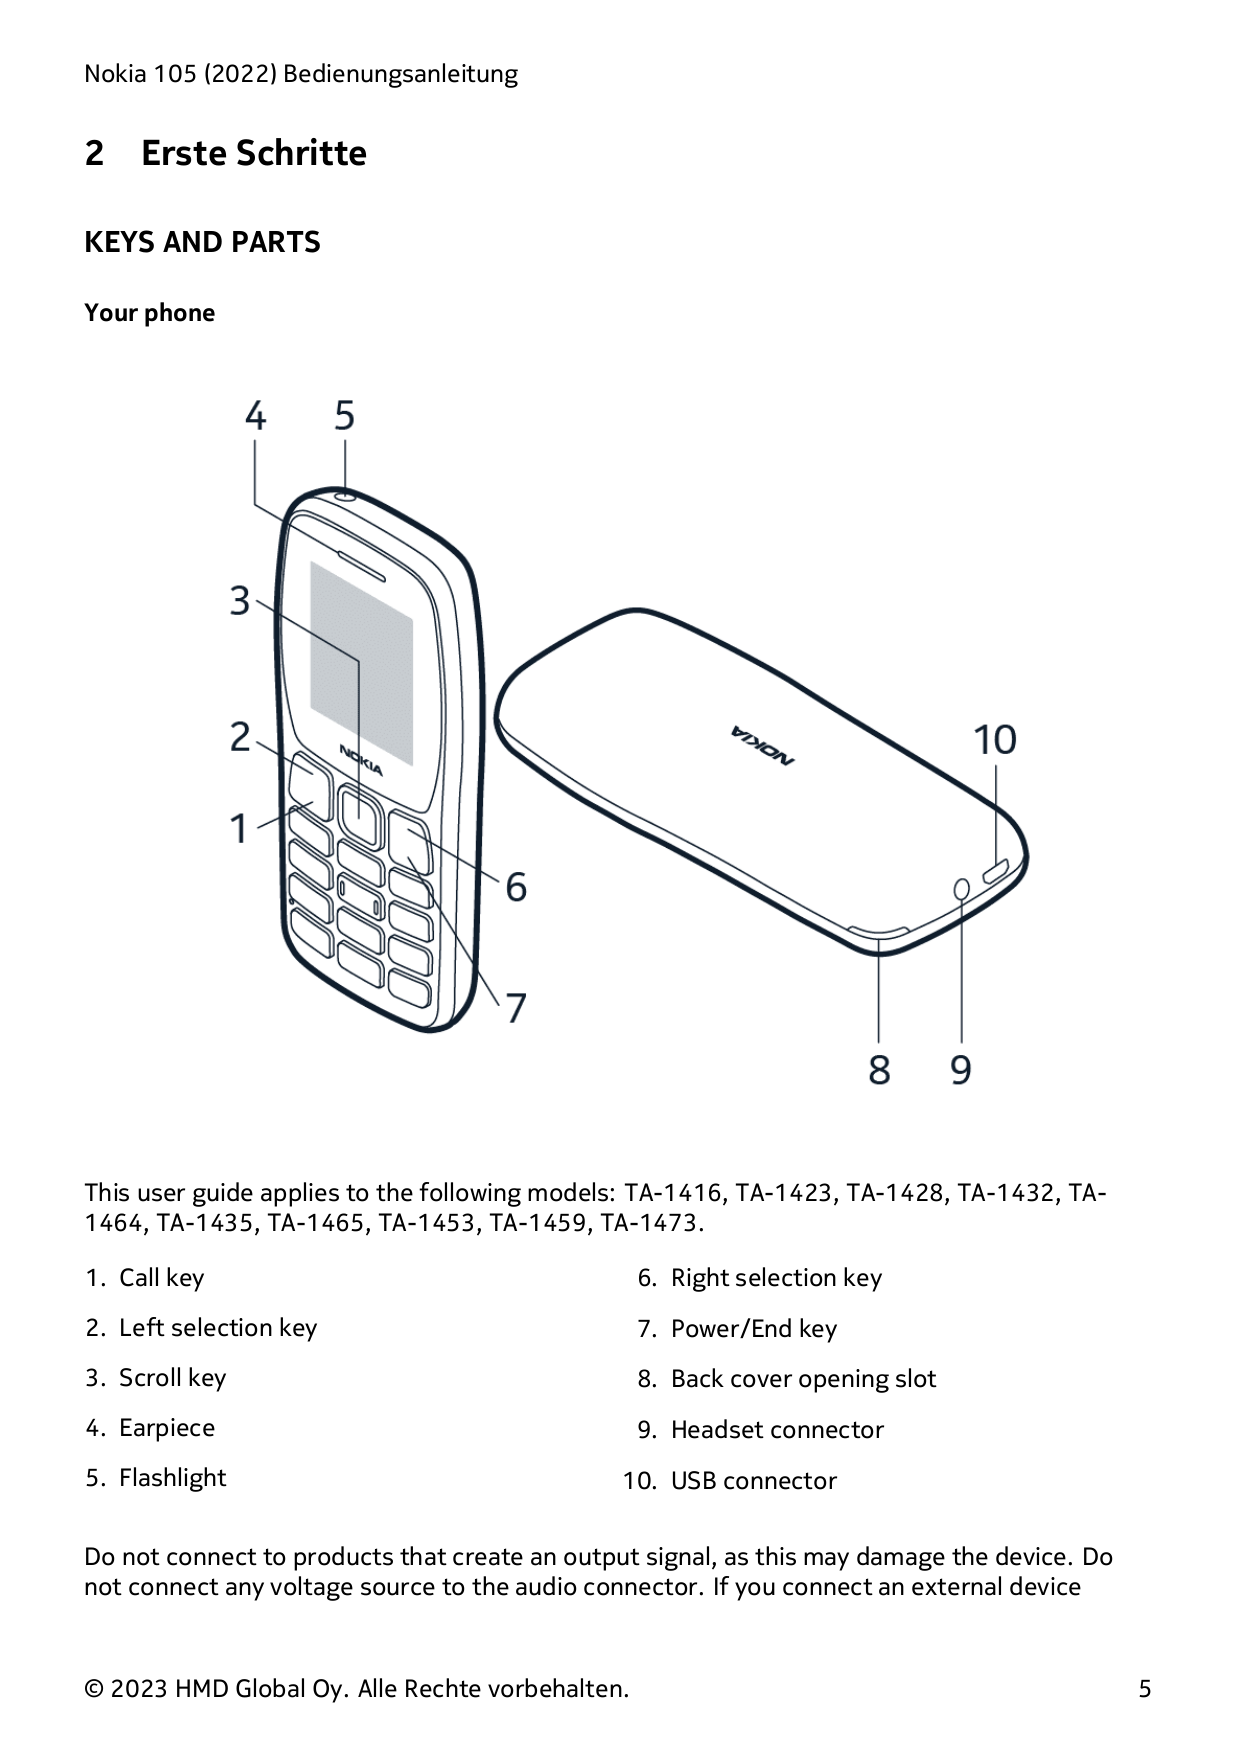 Nokia 105 (2022) Bedienungsanleitung2Erste SchritteKEYS AND PARTSYour phoneThis user guide applies to the following models: TA-1